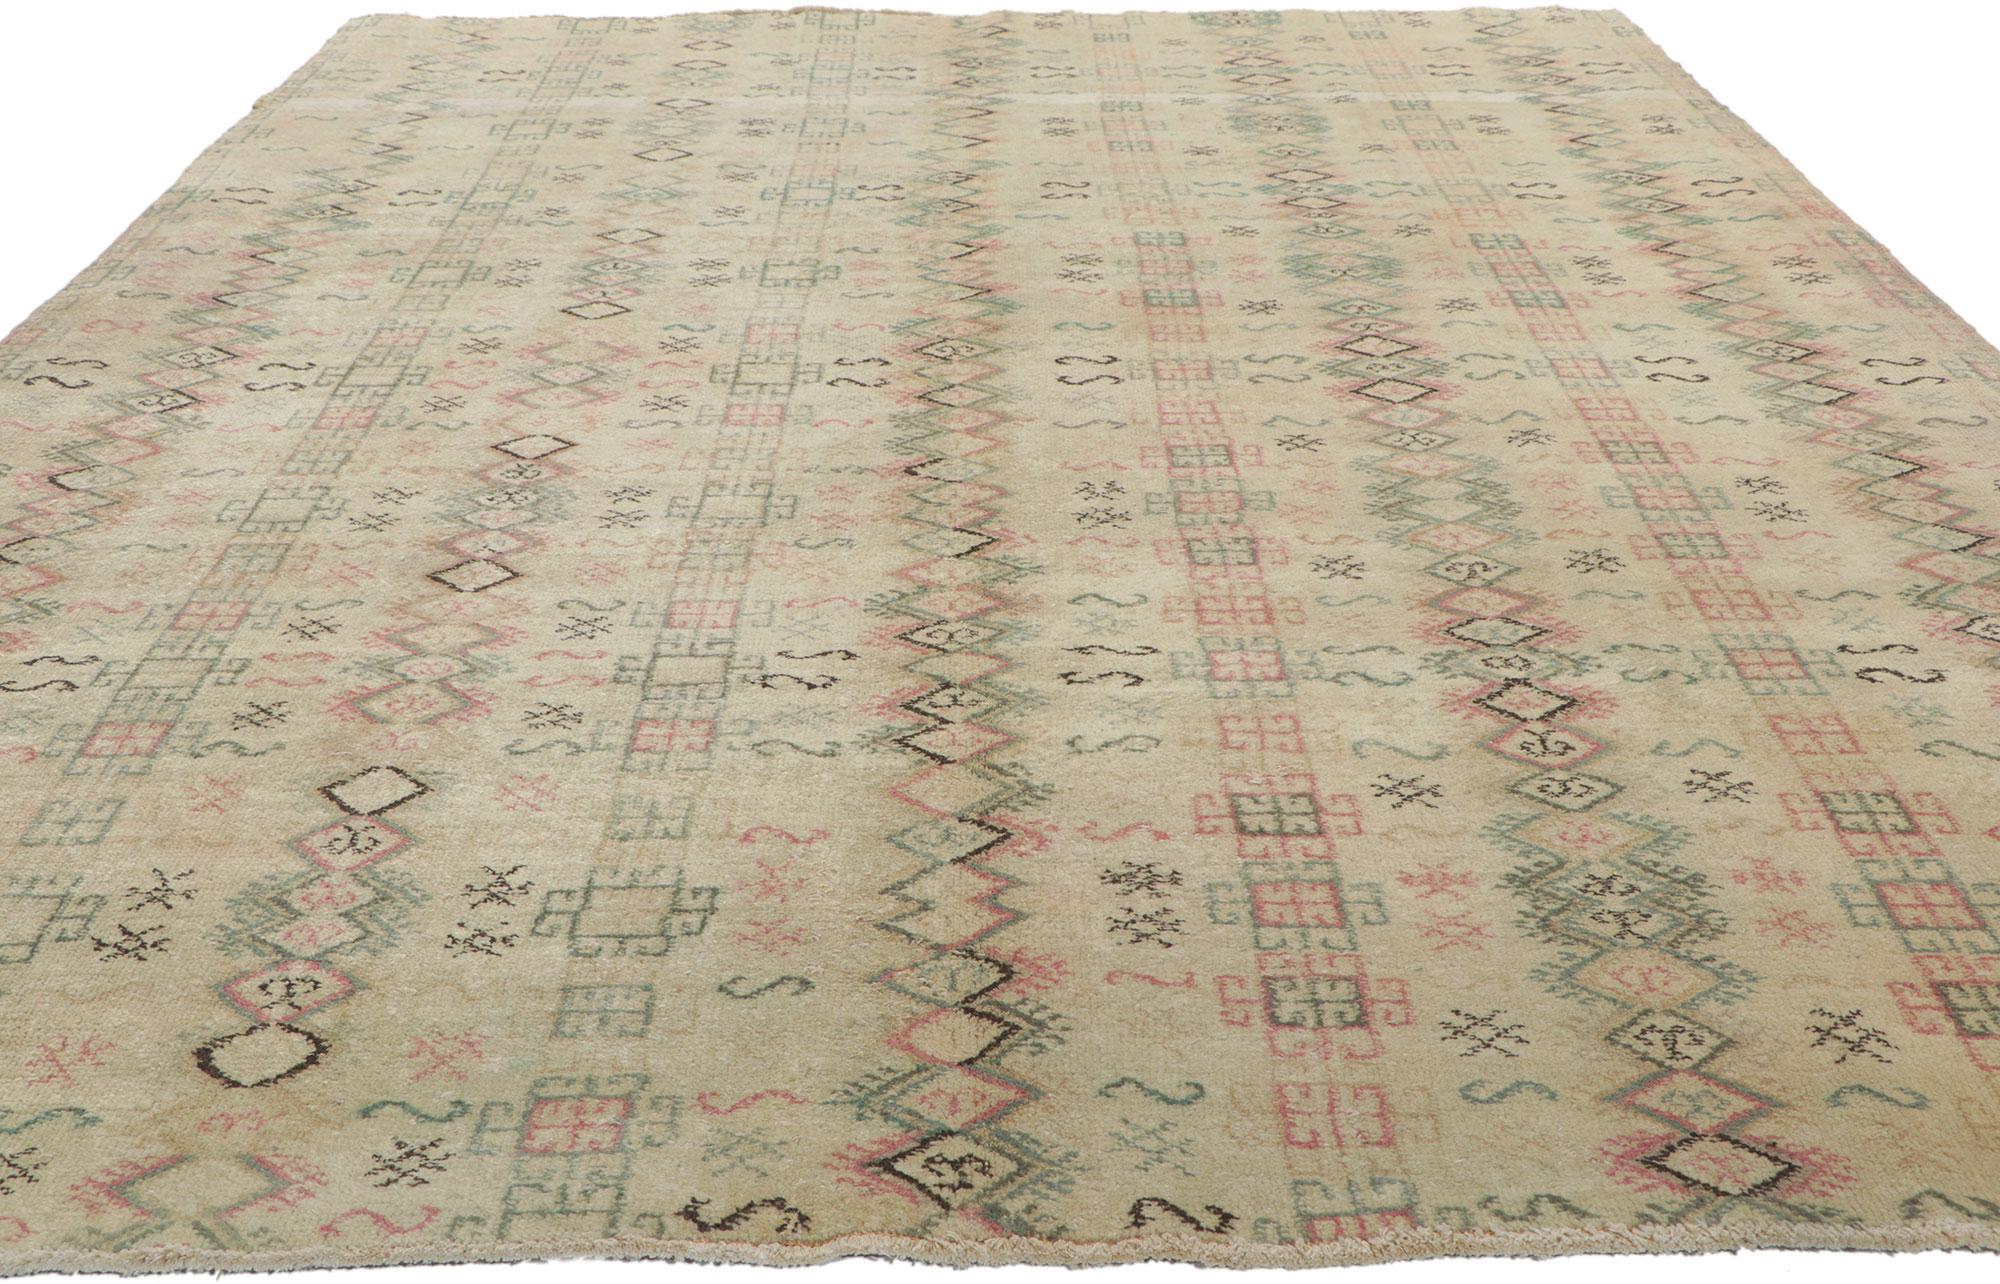 Tribal Rustic Vintage Turkish Sivas Rug with Faded Earth-Tone Colors For Sale